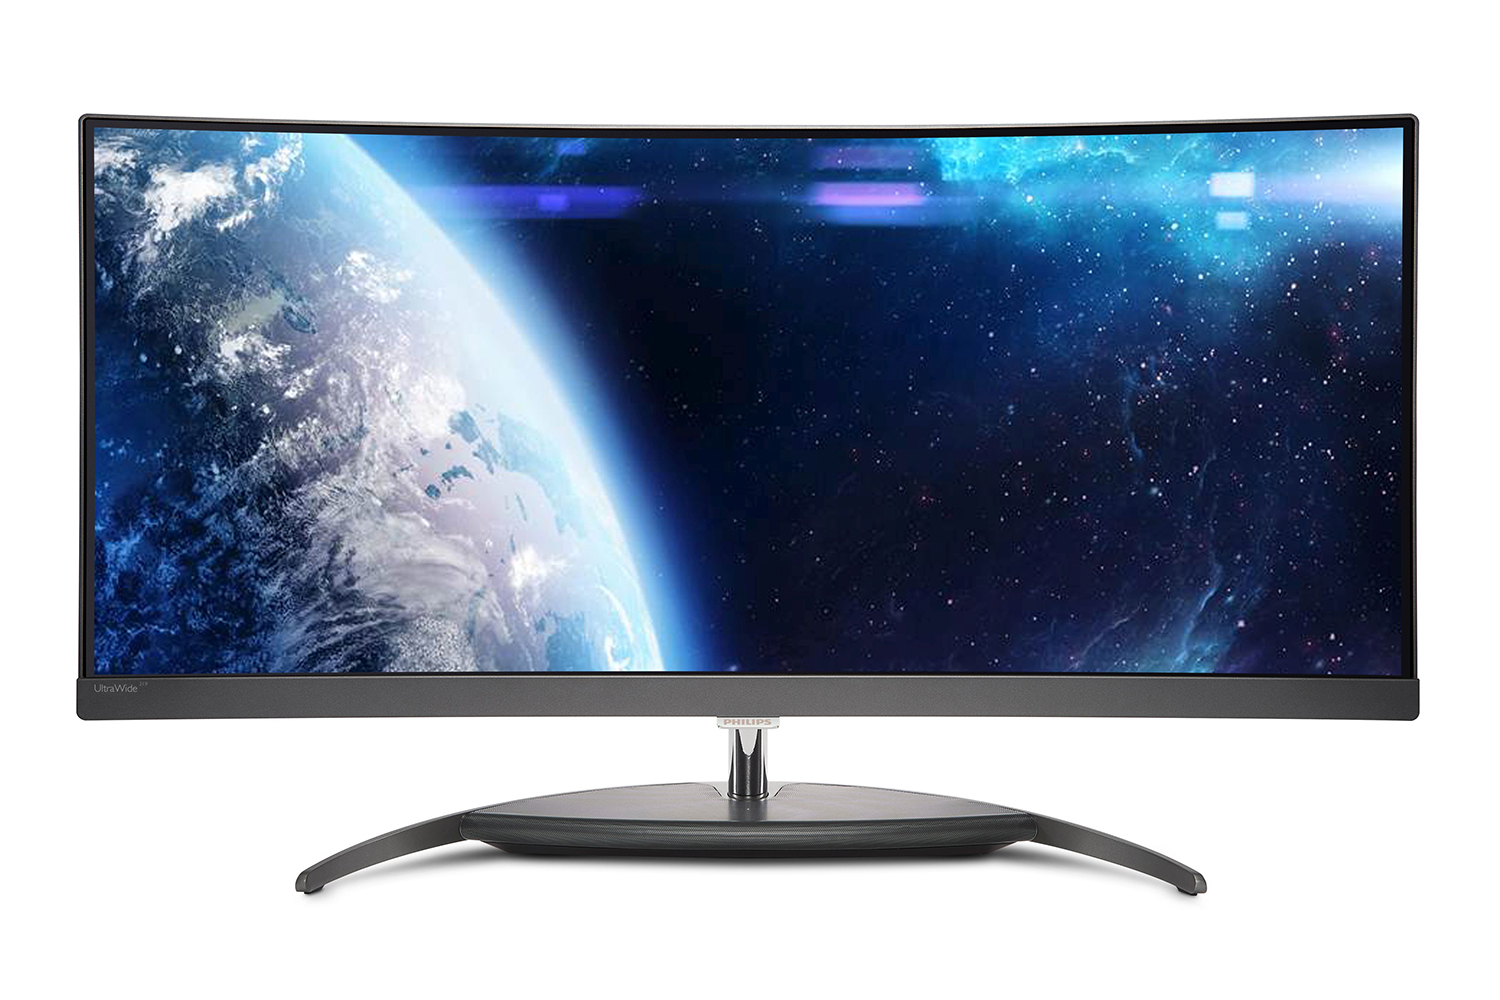 philips debuts its first foray into curved monitors at ifa 2015 bdm3490uc f image